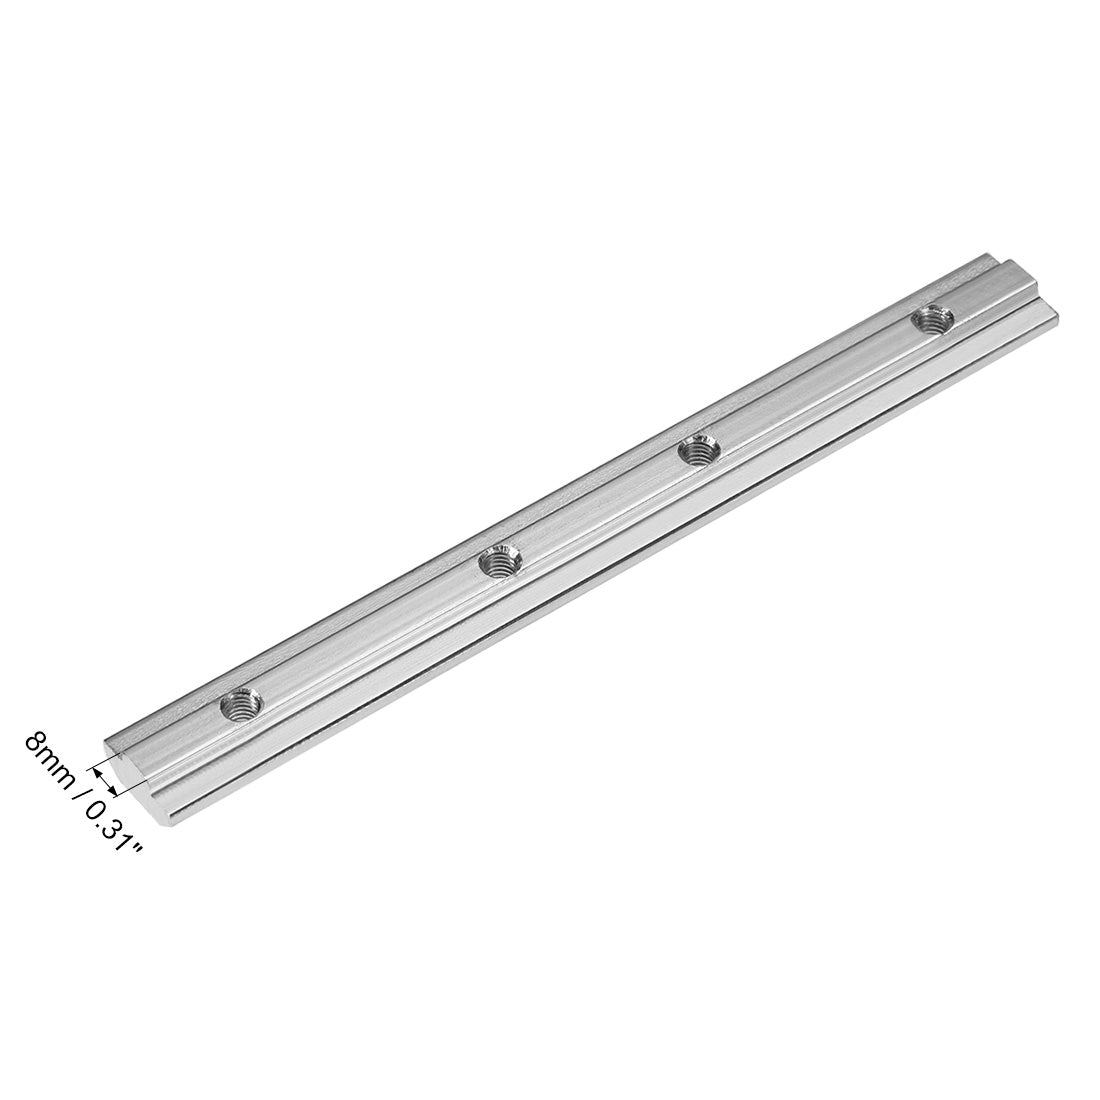 uxcell Uxcell Straight Line Connector, 7 Inch Joint Bracket for 4040 Series T Slot 8mm Aluminum Extrusion Profile, 4 Pcs